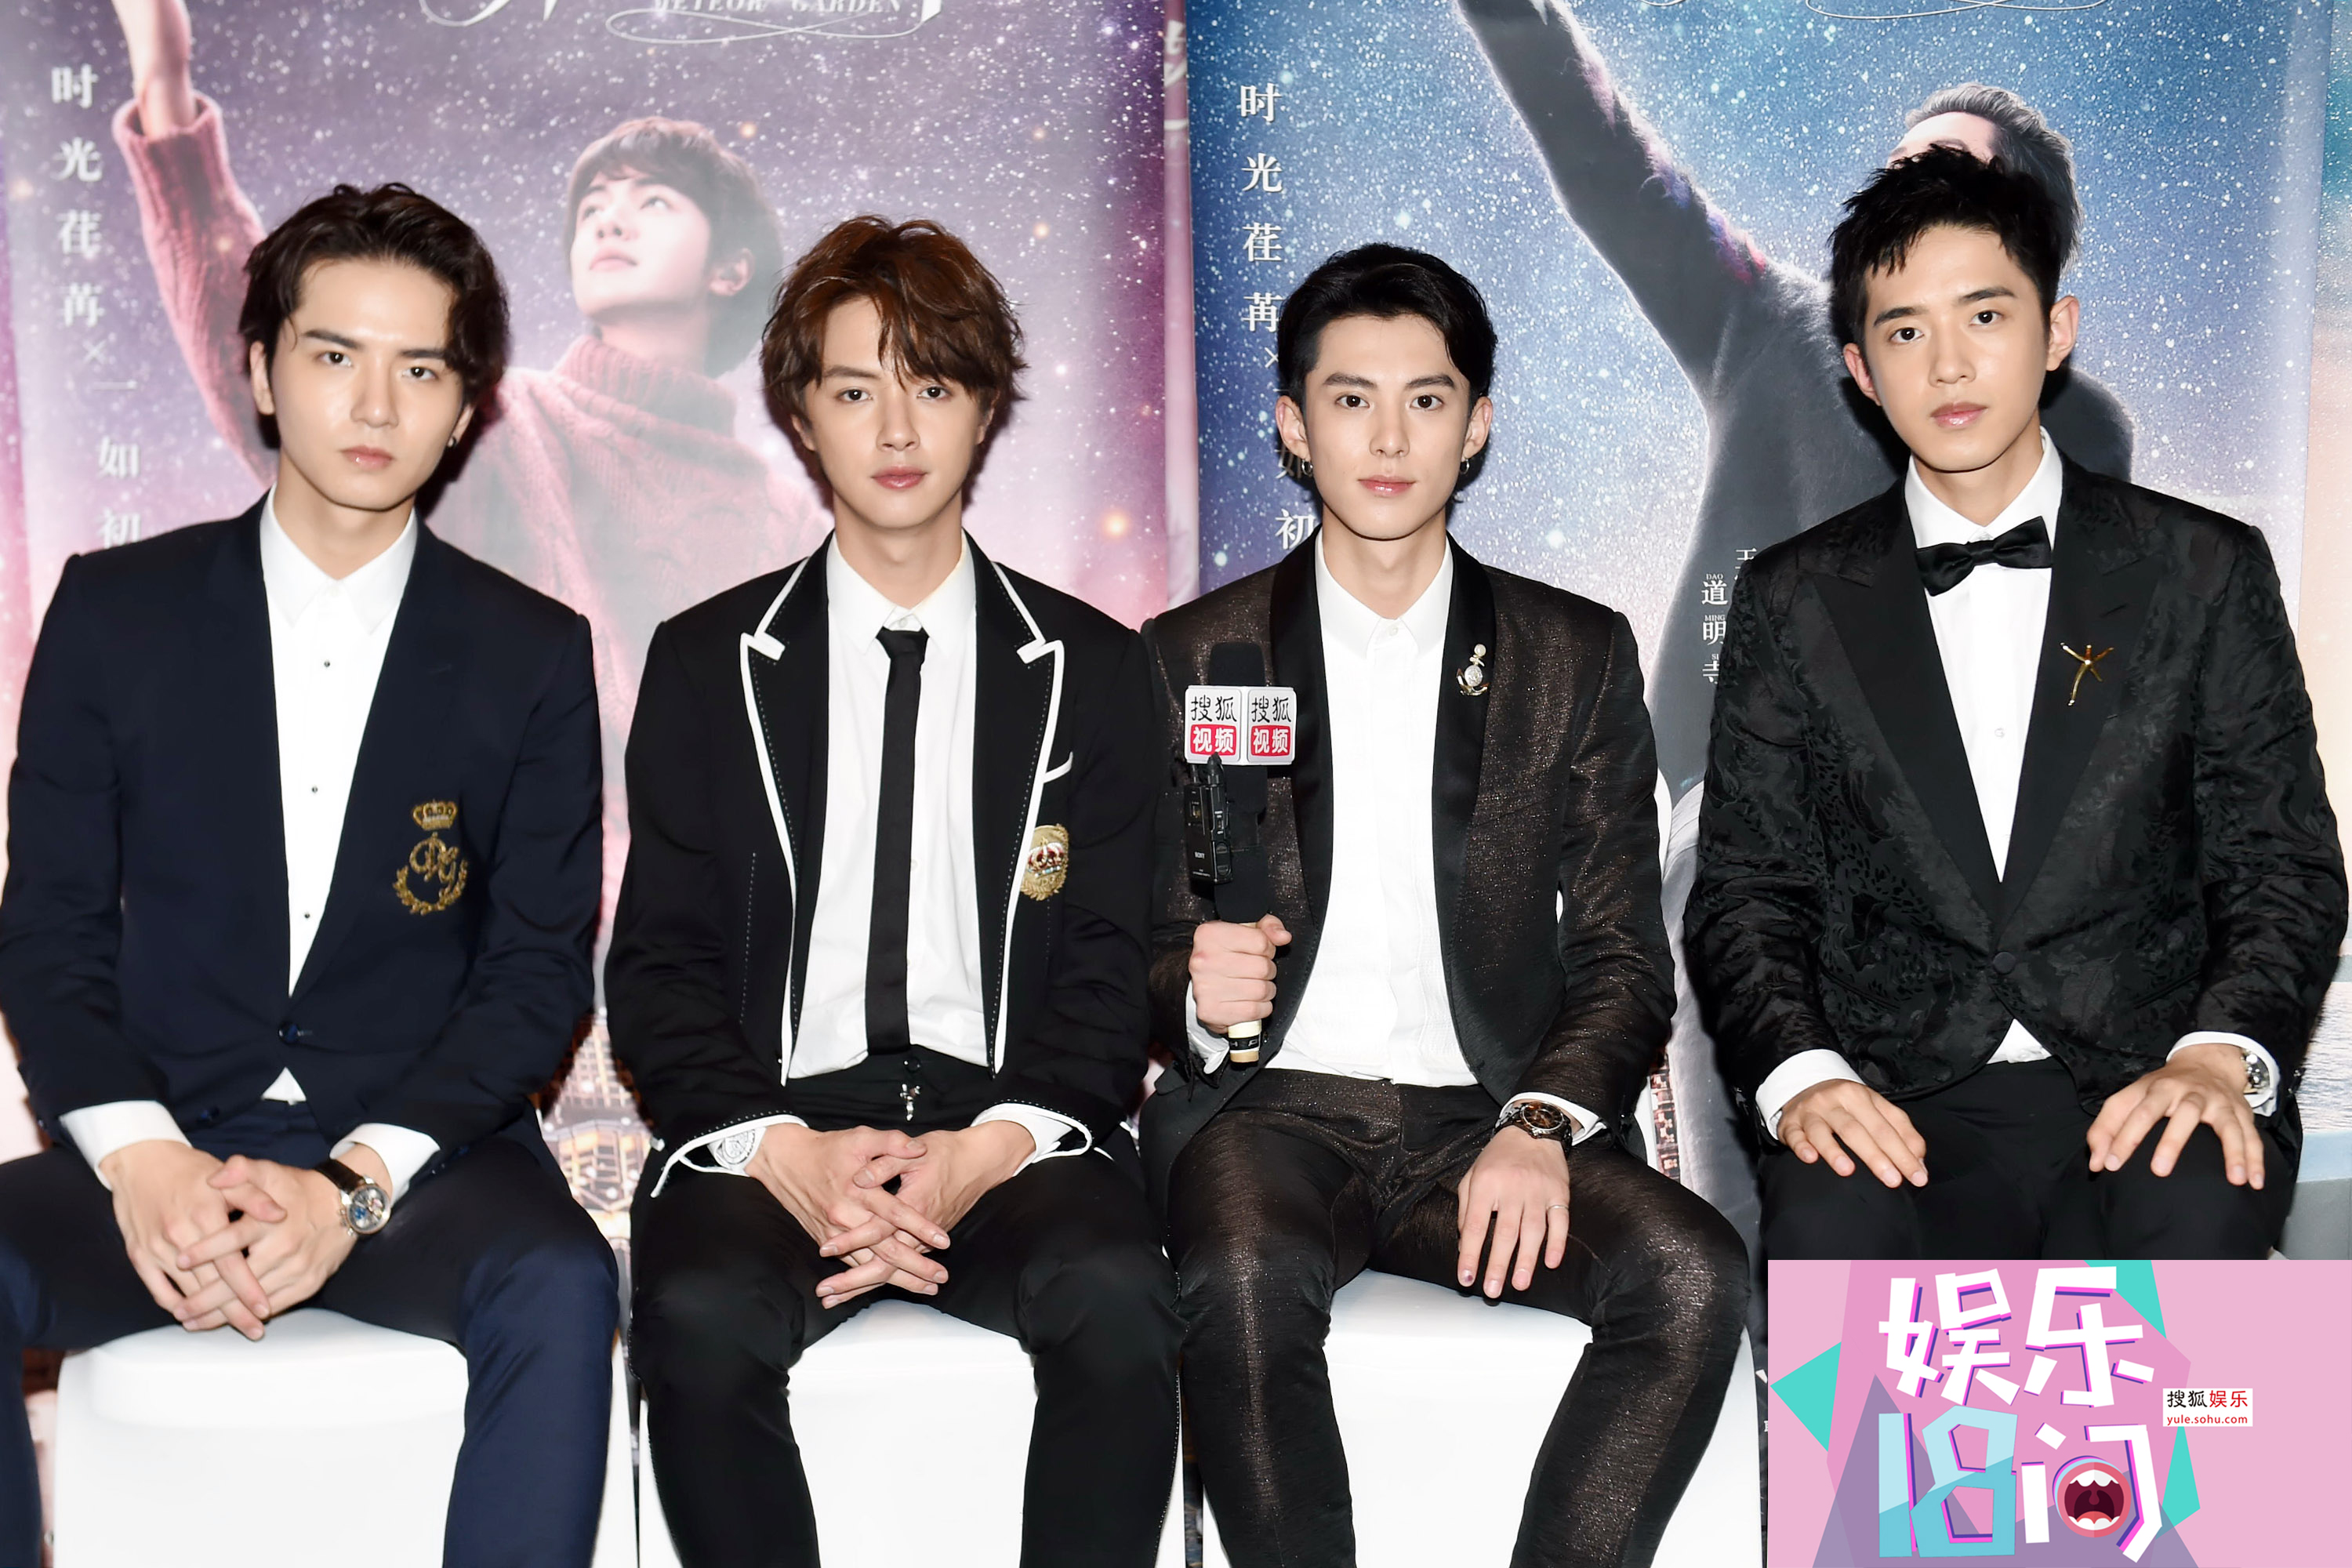 New F4 are ready to charm viewers in Netflix’s ‘Meteor Garden’ 2018 remake | South China Morning ...